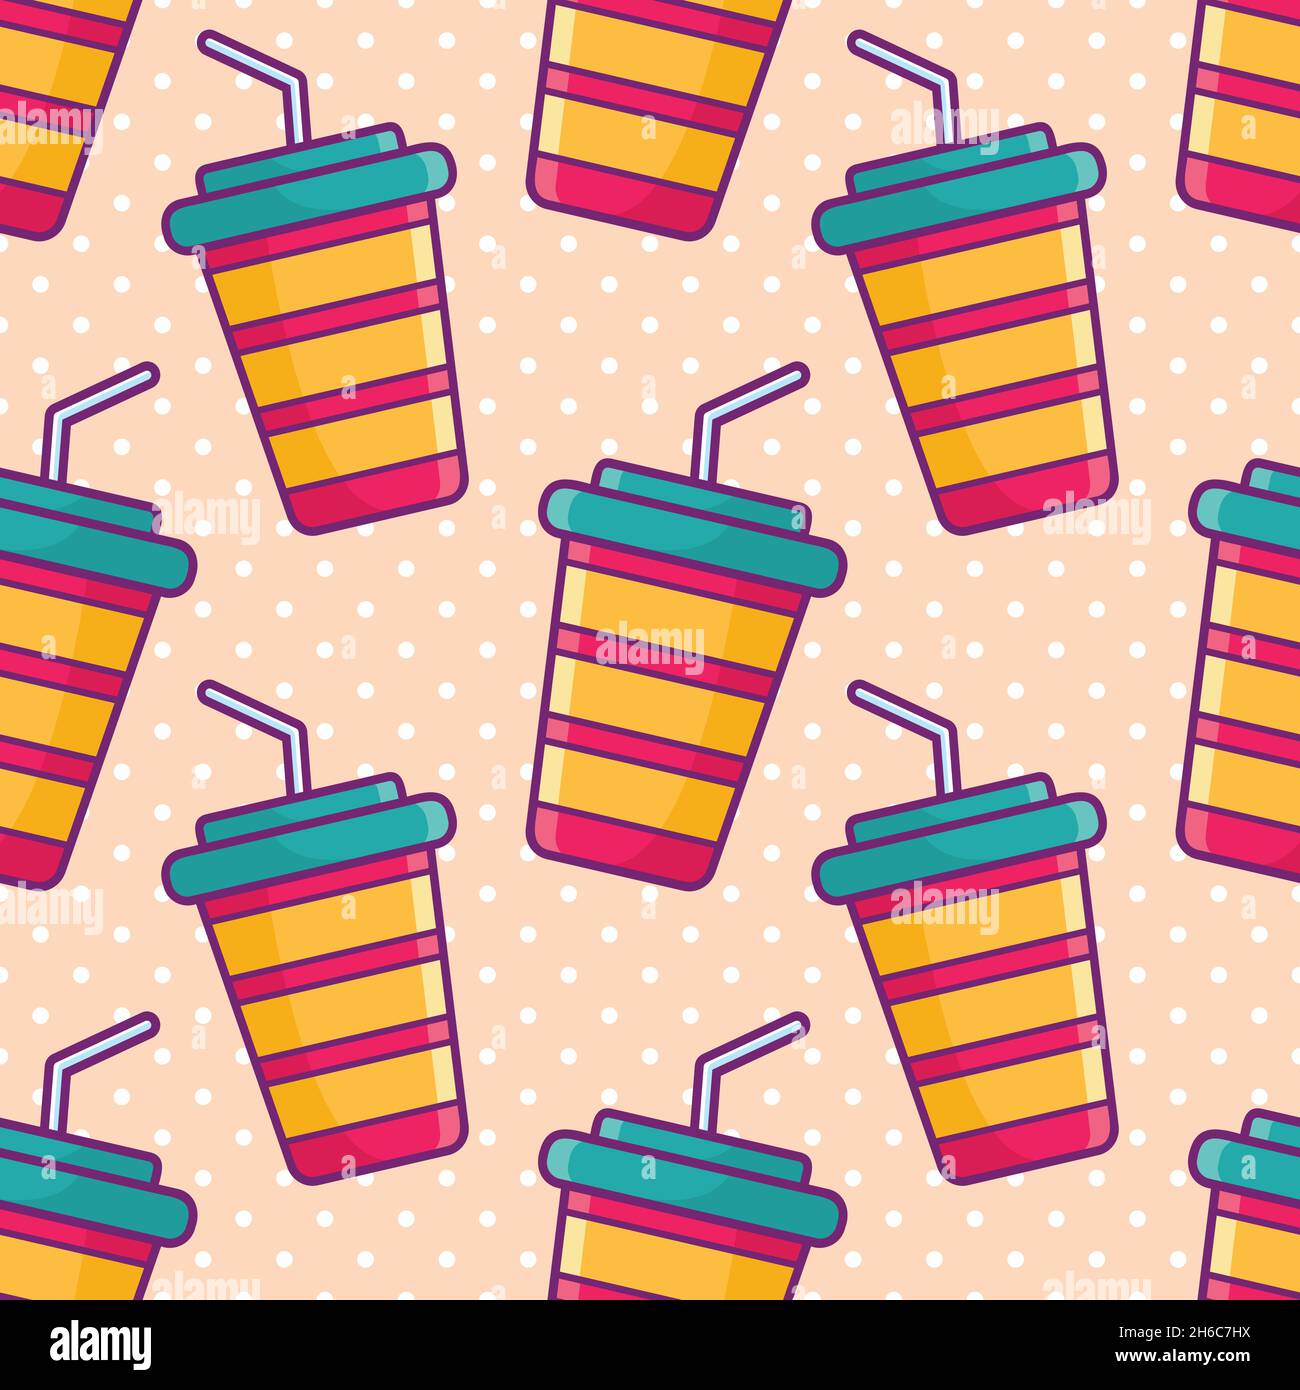 drink cup seamless pattern vector illustration Stock Vector